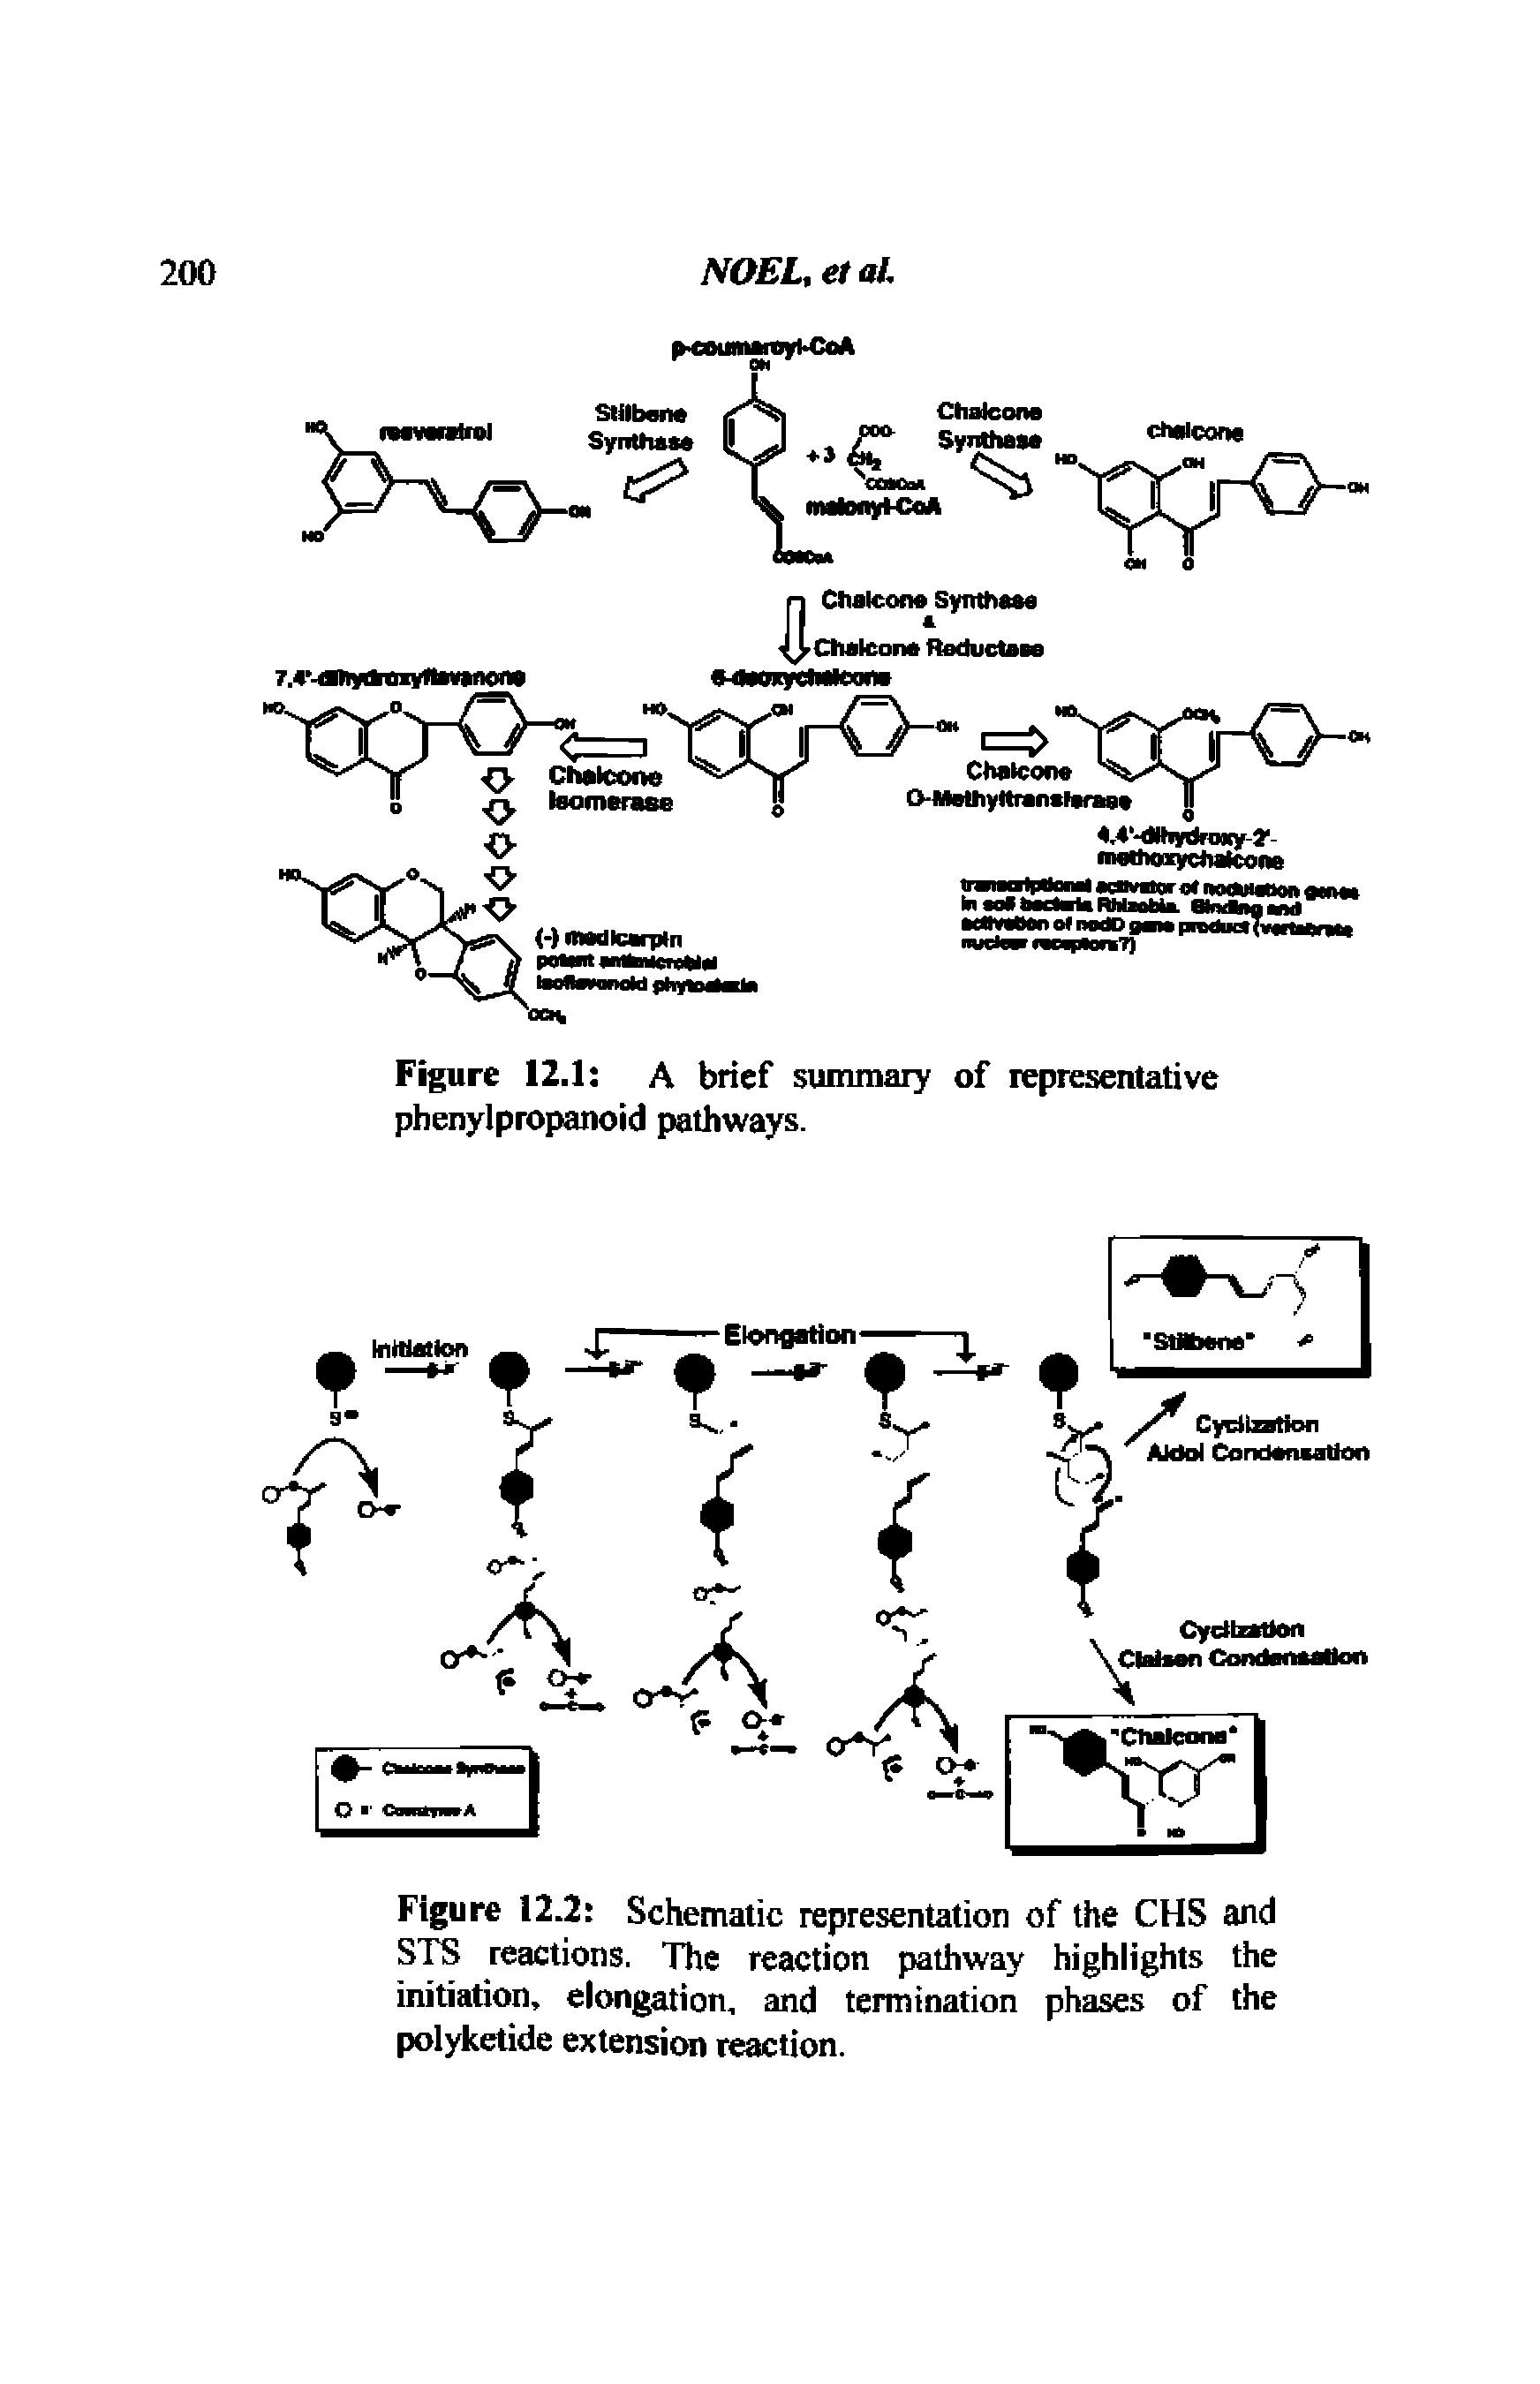 Figure 12.2 Schematic representation of the CHS and STS reactions. The reaction pathway highlights the initiation, elongation, and termination phases of the polyketide extension reaction.